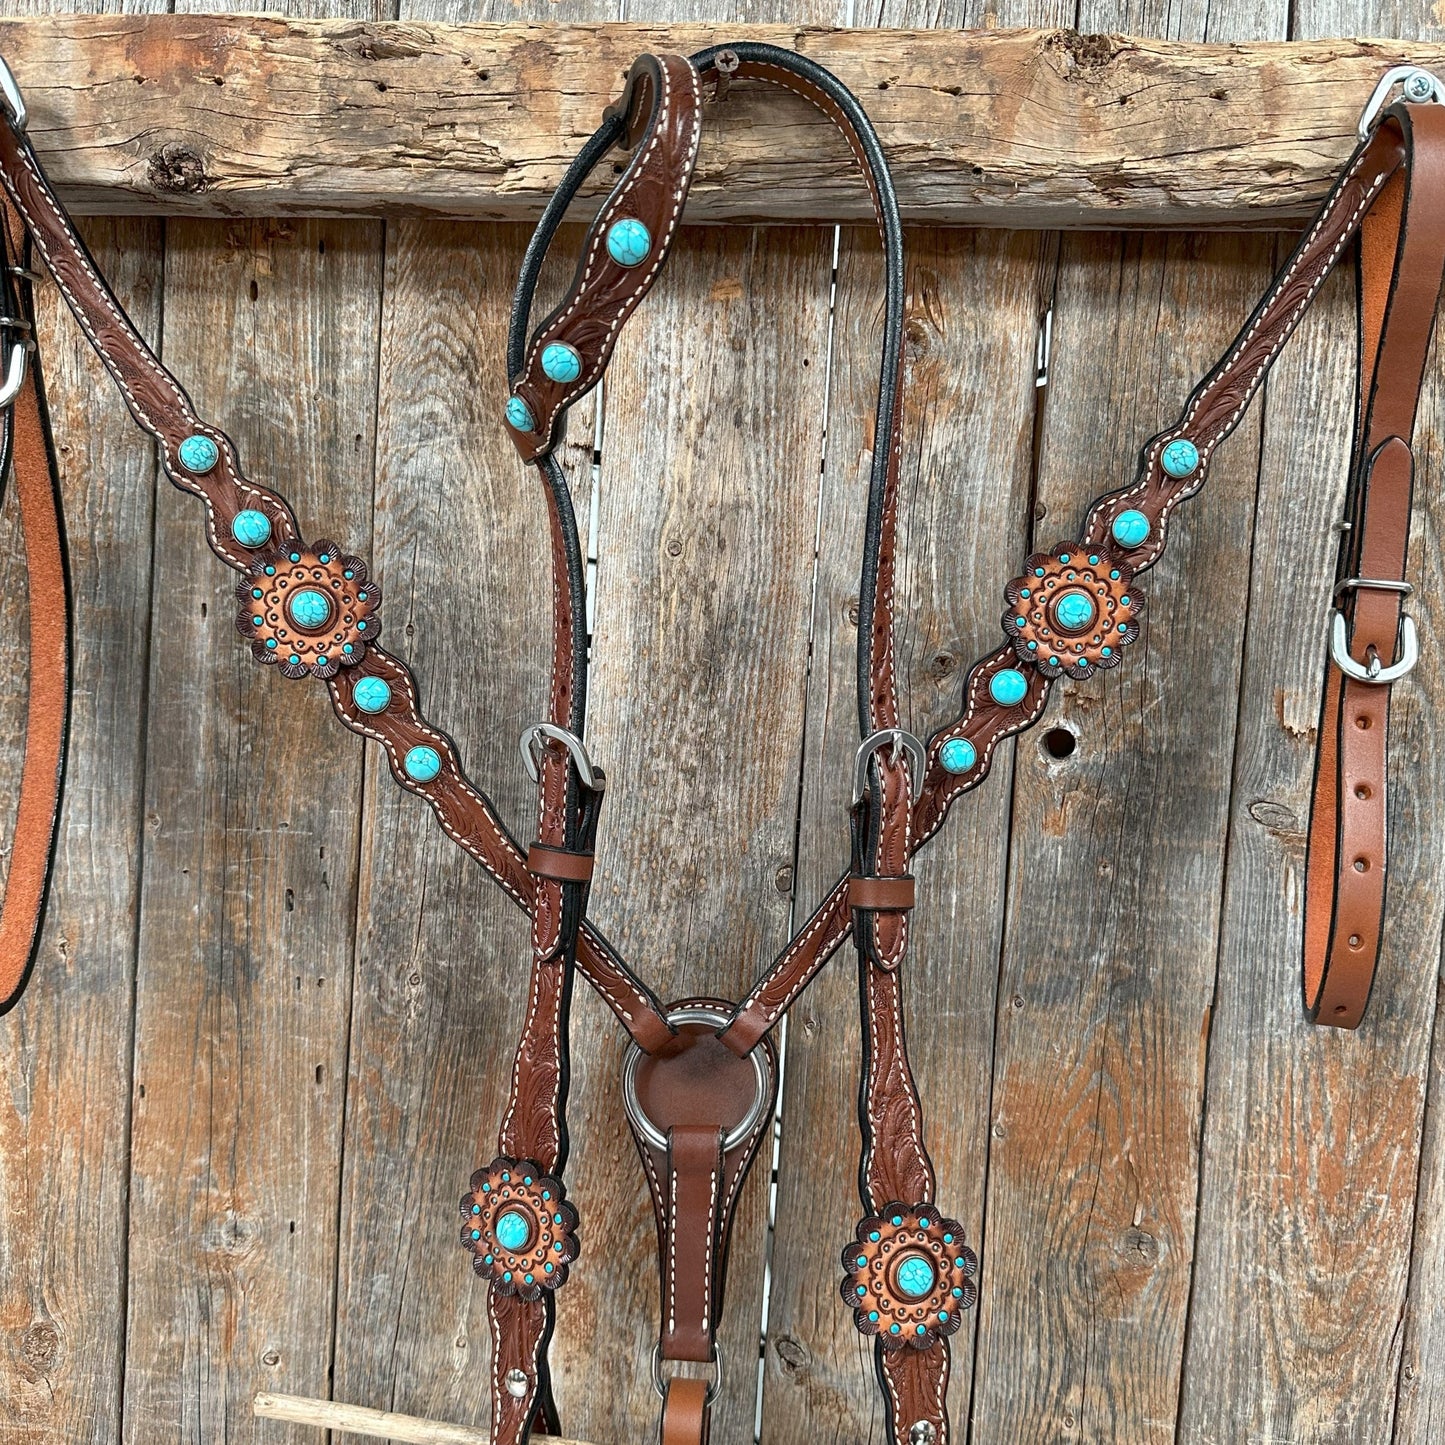 Medium Oil Floral Rosettes and Turquoise One Ear/ Breastcollar Tack Set #OEBC566